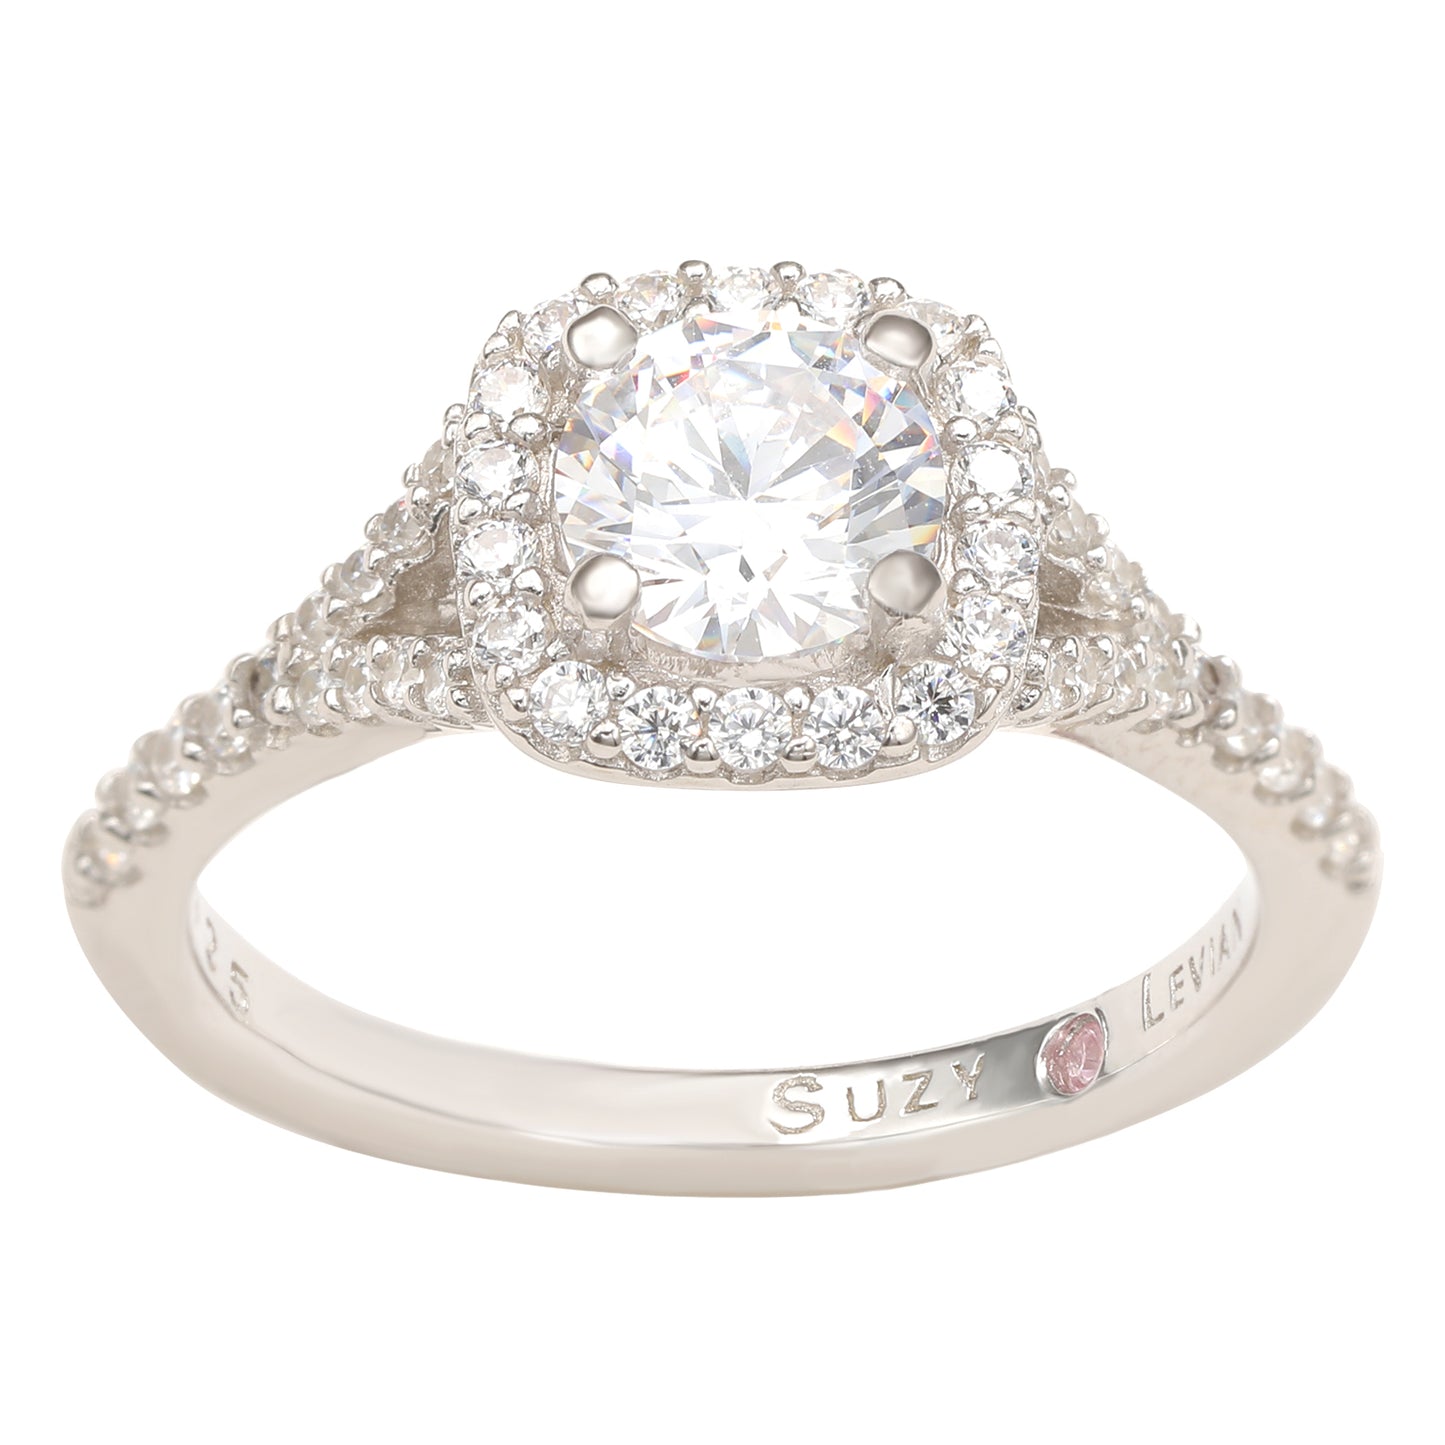 Suzy Levian Sterling Silver White Round Cut Cubic Zirconia Halo Ring